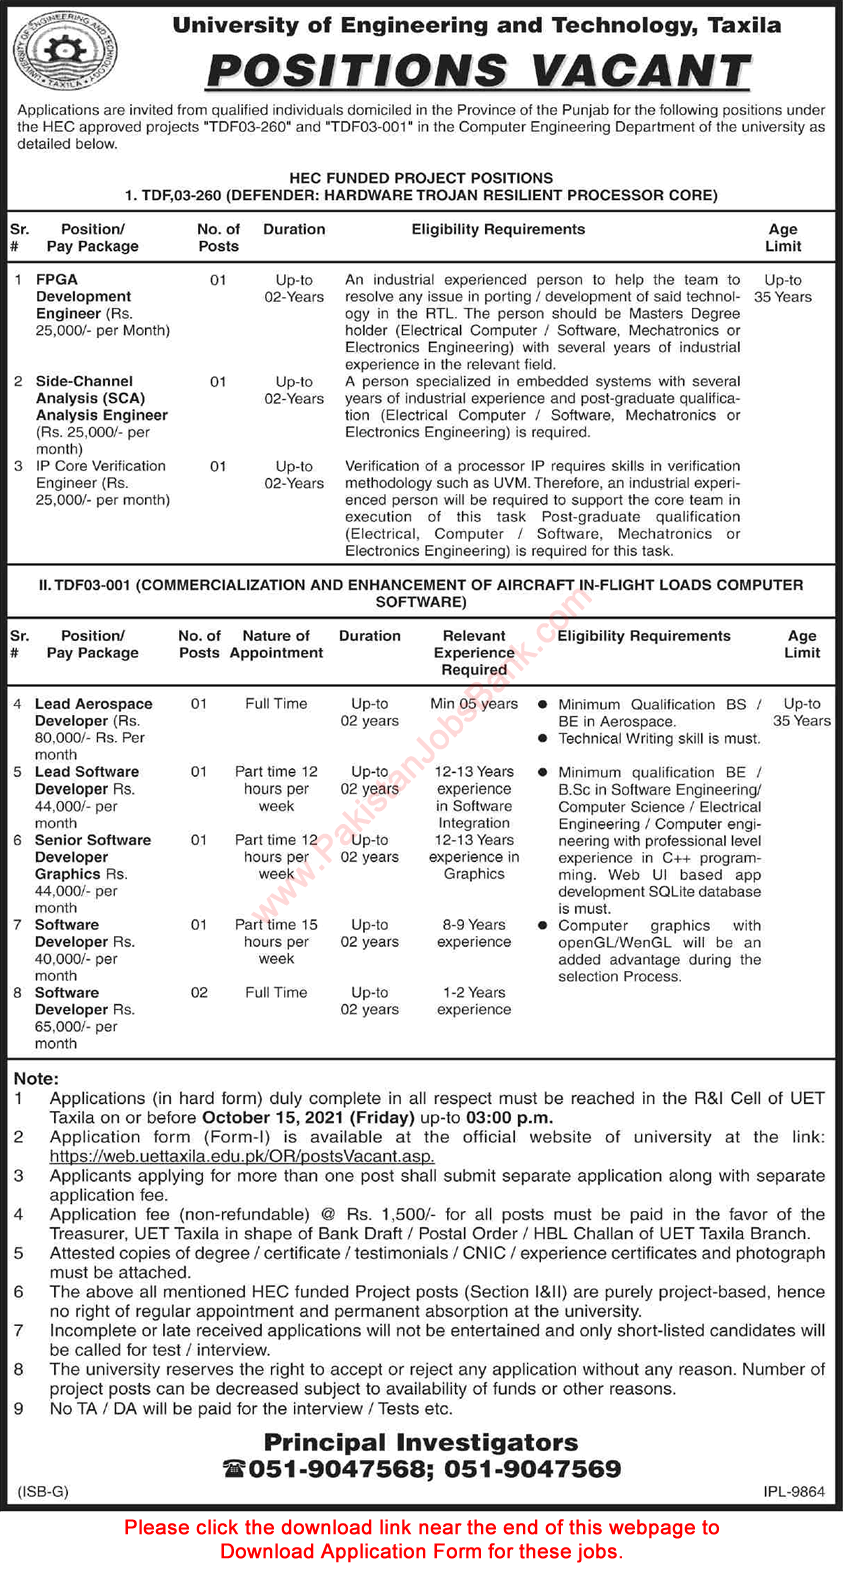 UET Taxila Jobs September 2021 Application Form Software Developers & Others Latest